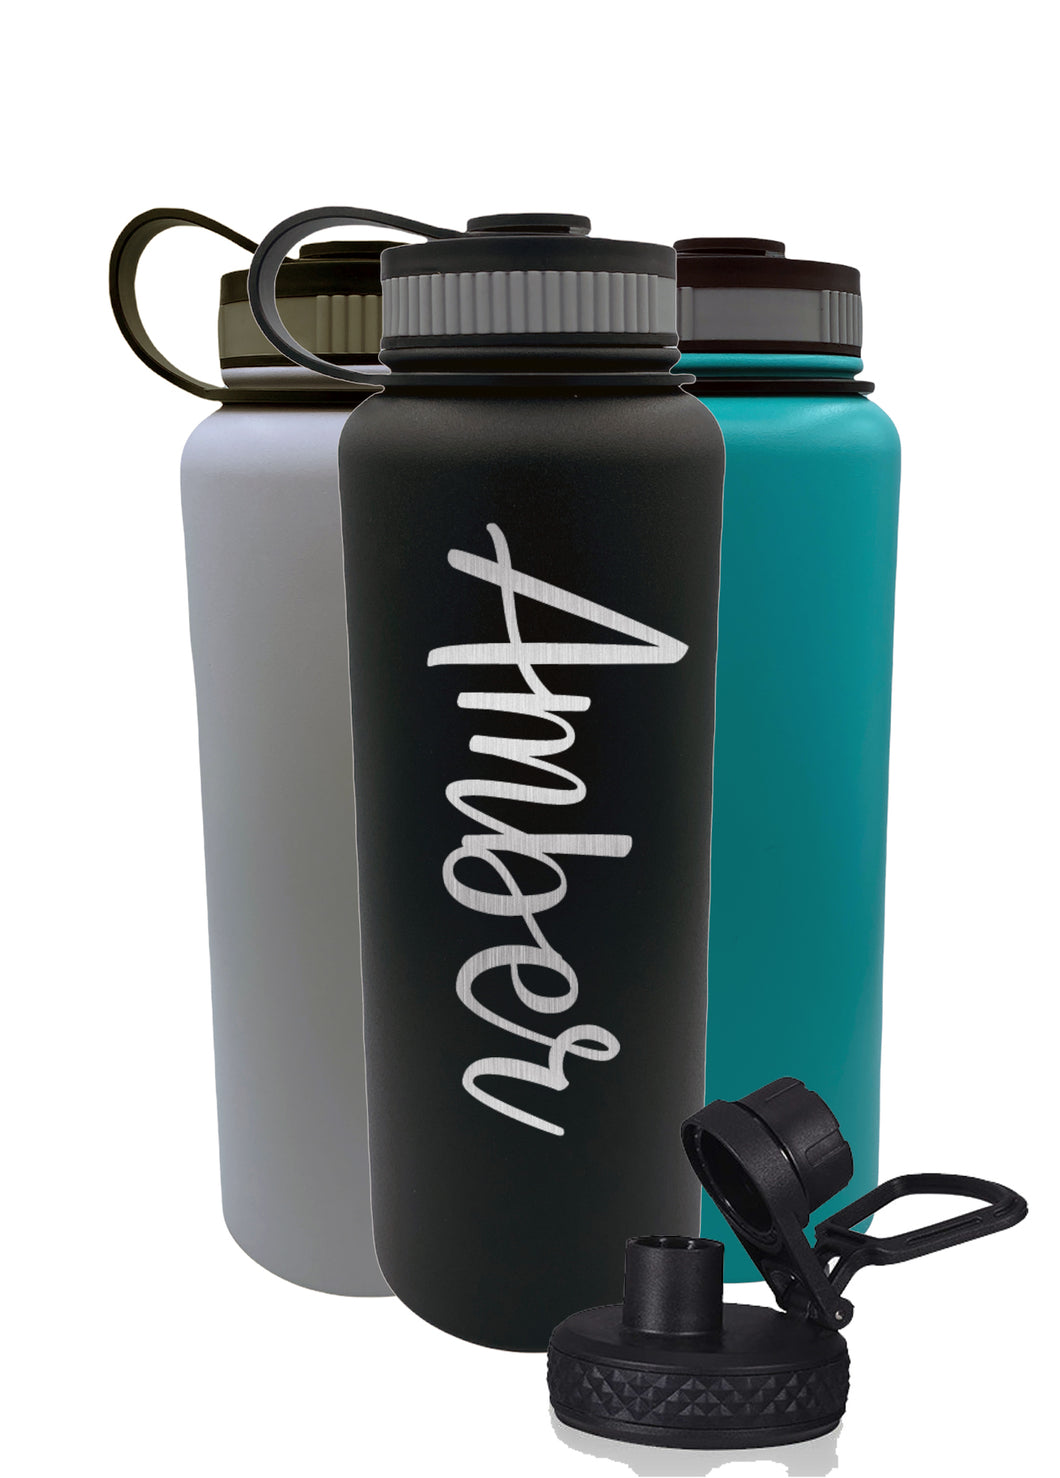 Personalized Personalized RTIC 40 oz Water Bottle - Customize with Your  Logo, Monogram, or Design - Custom Tumbler Shop